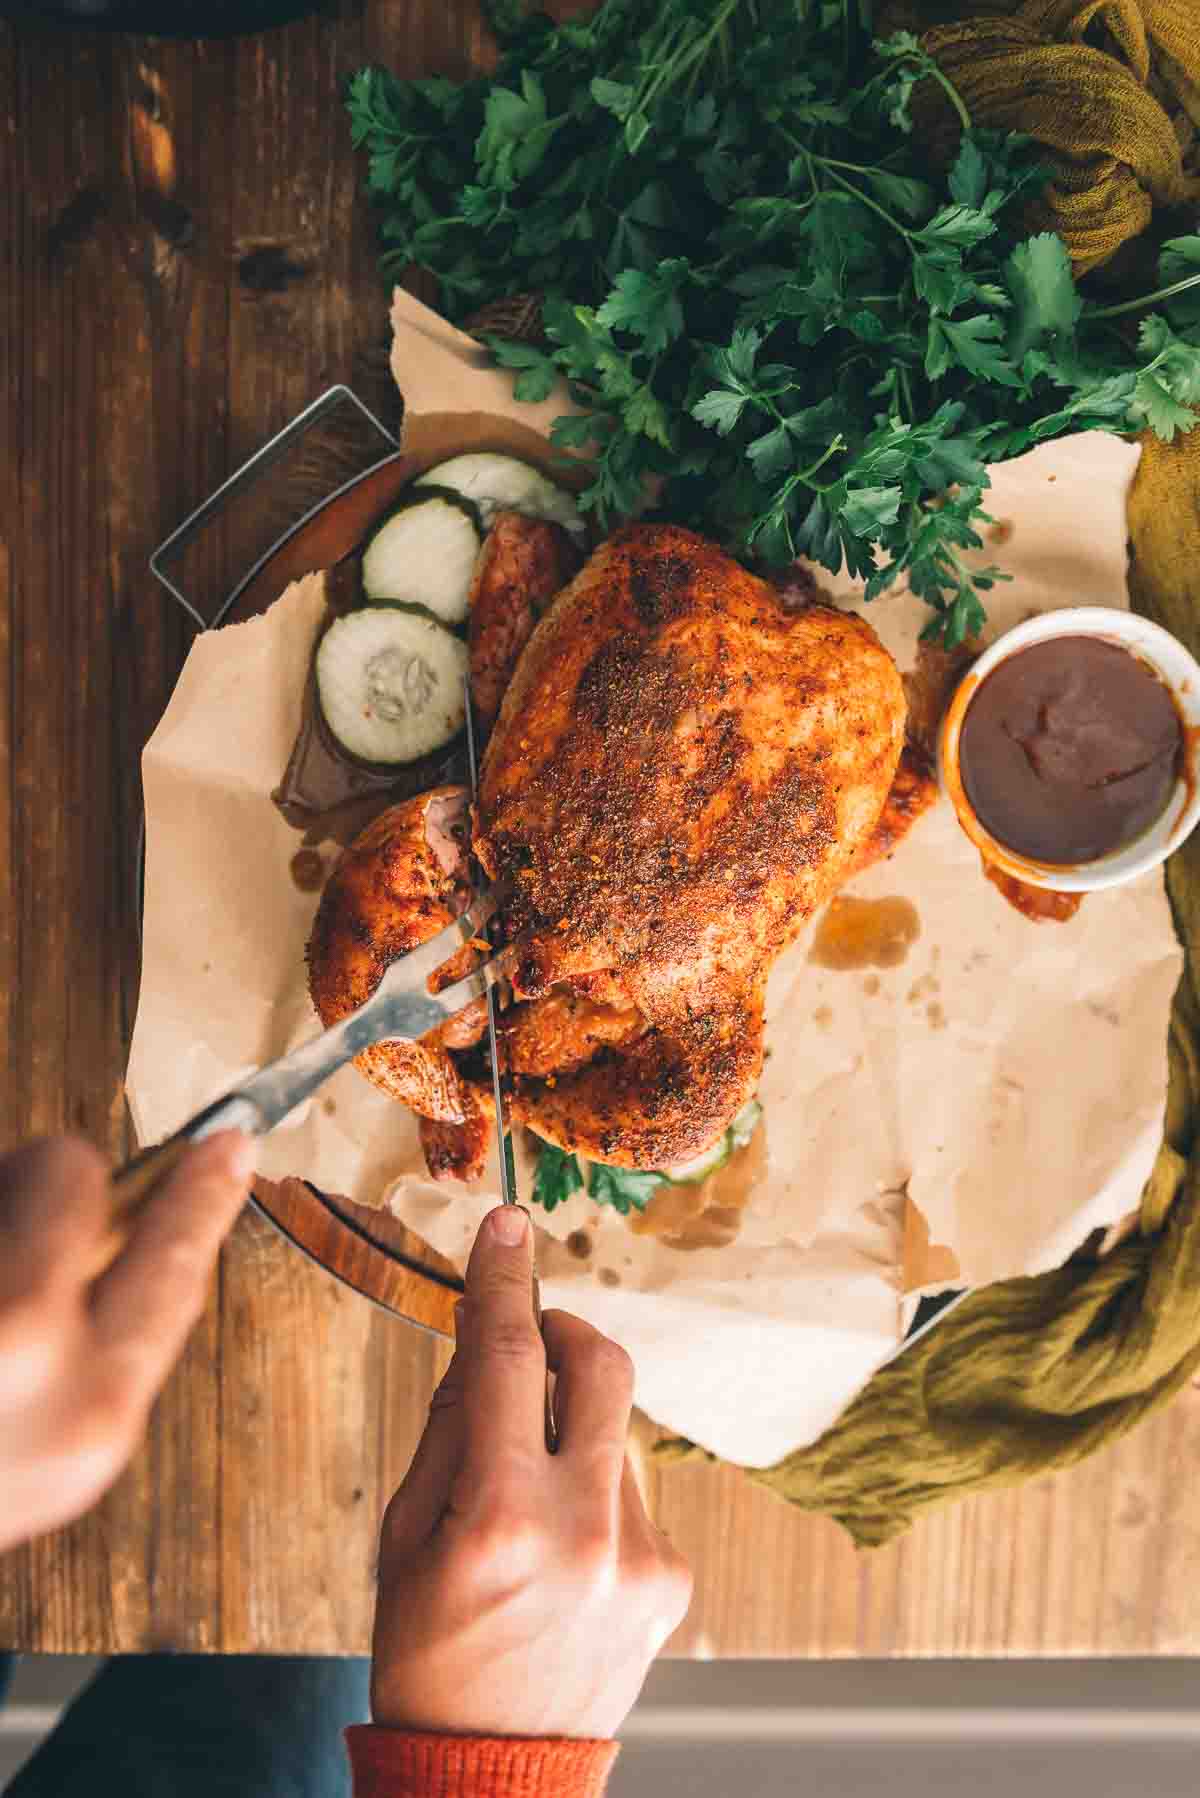 Hands holding a knife and fork slicing the drum from the whole chicken. 